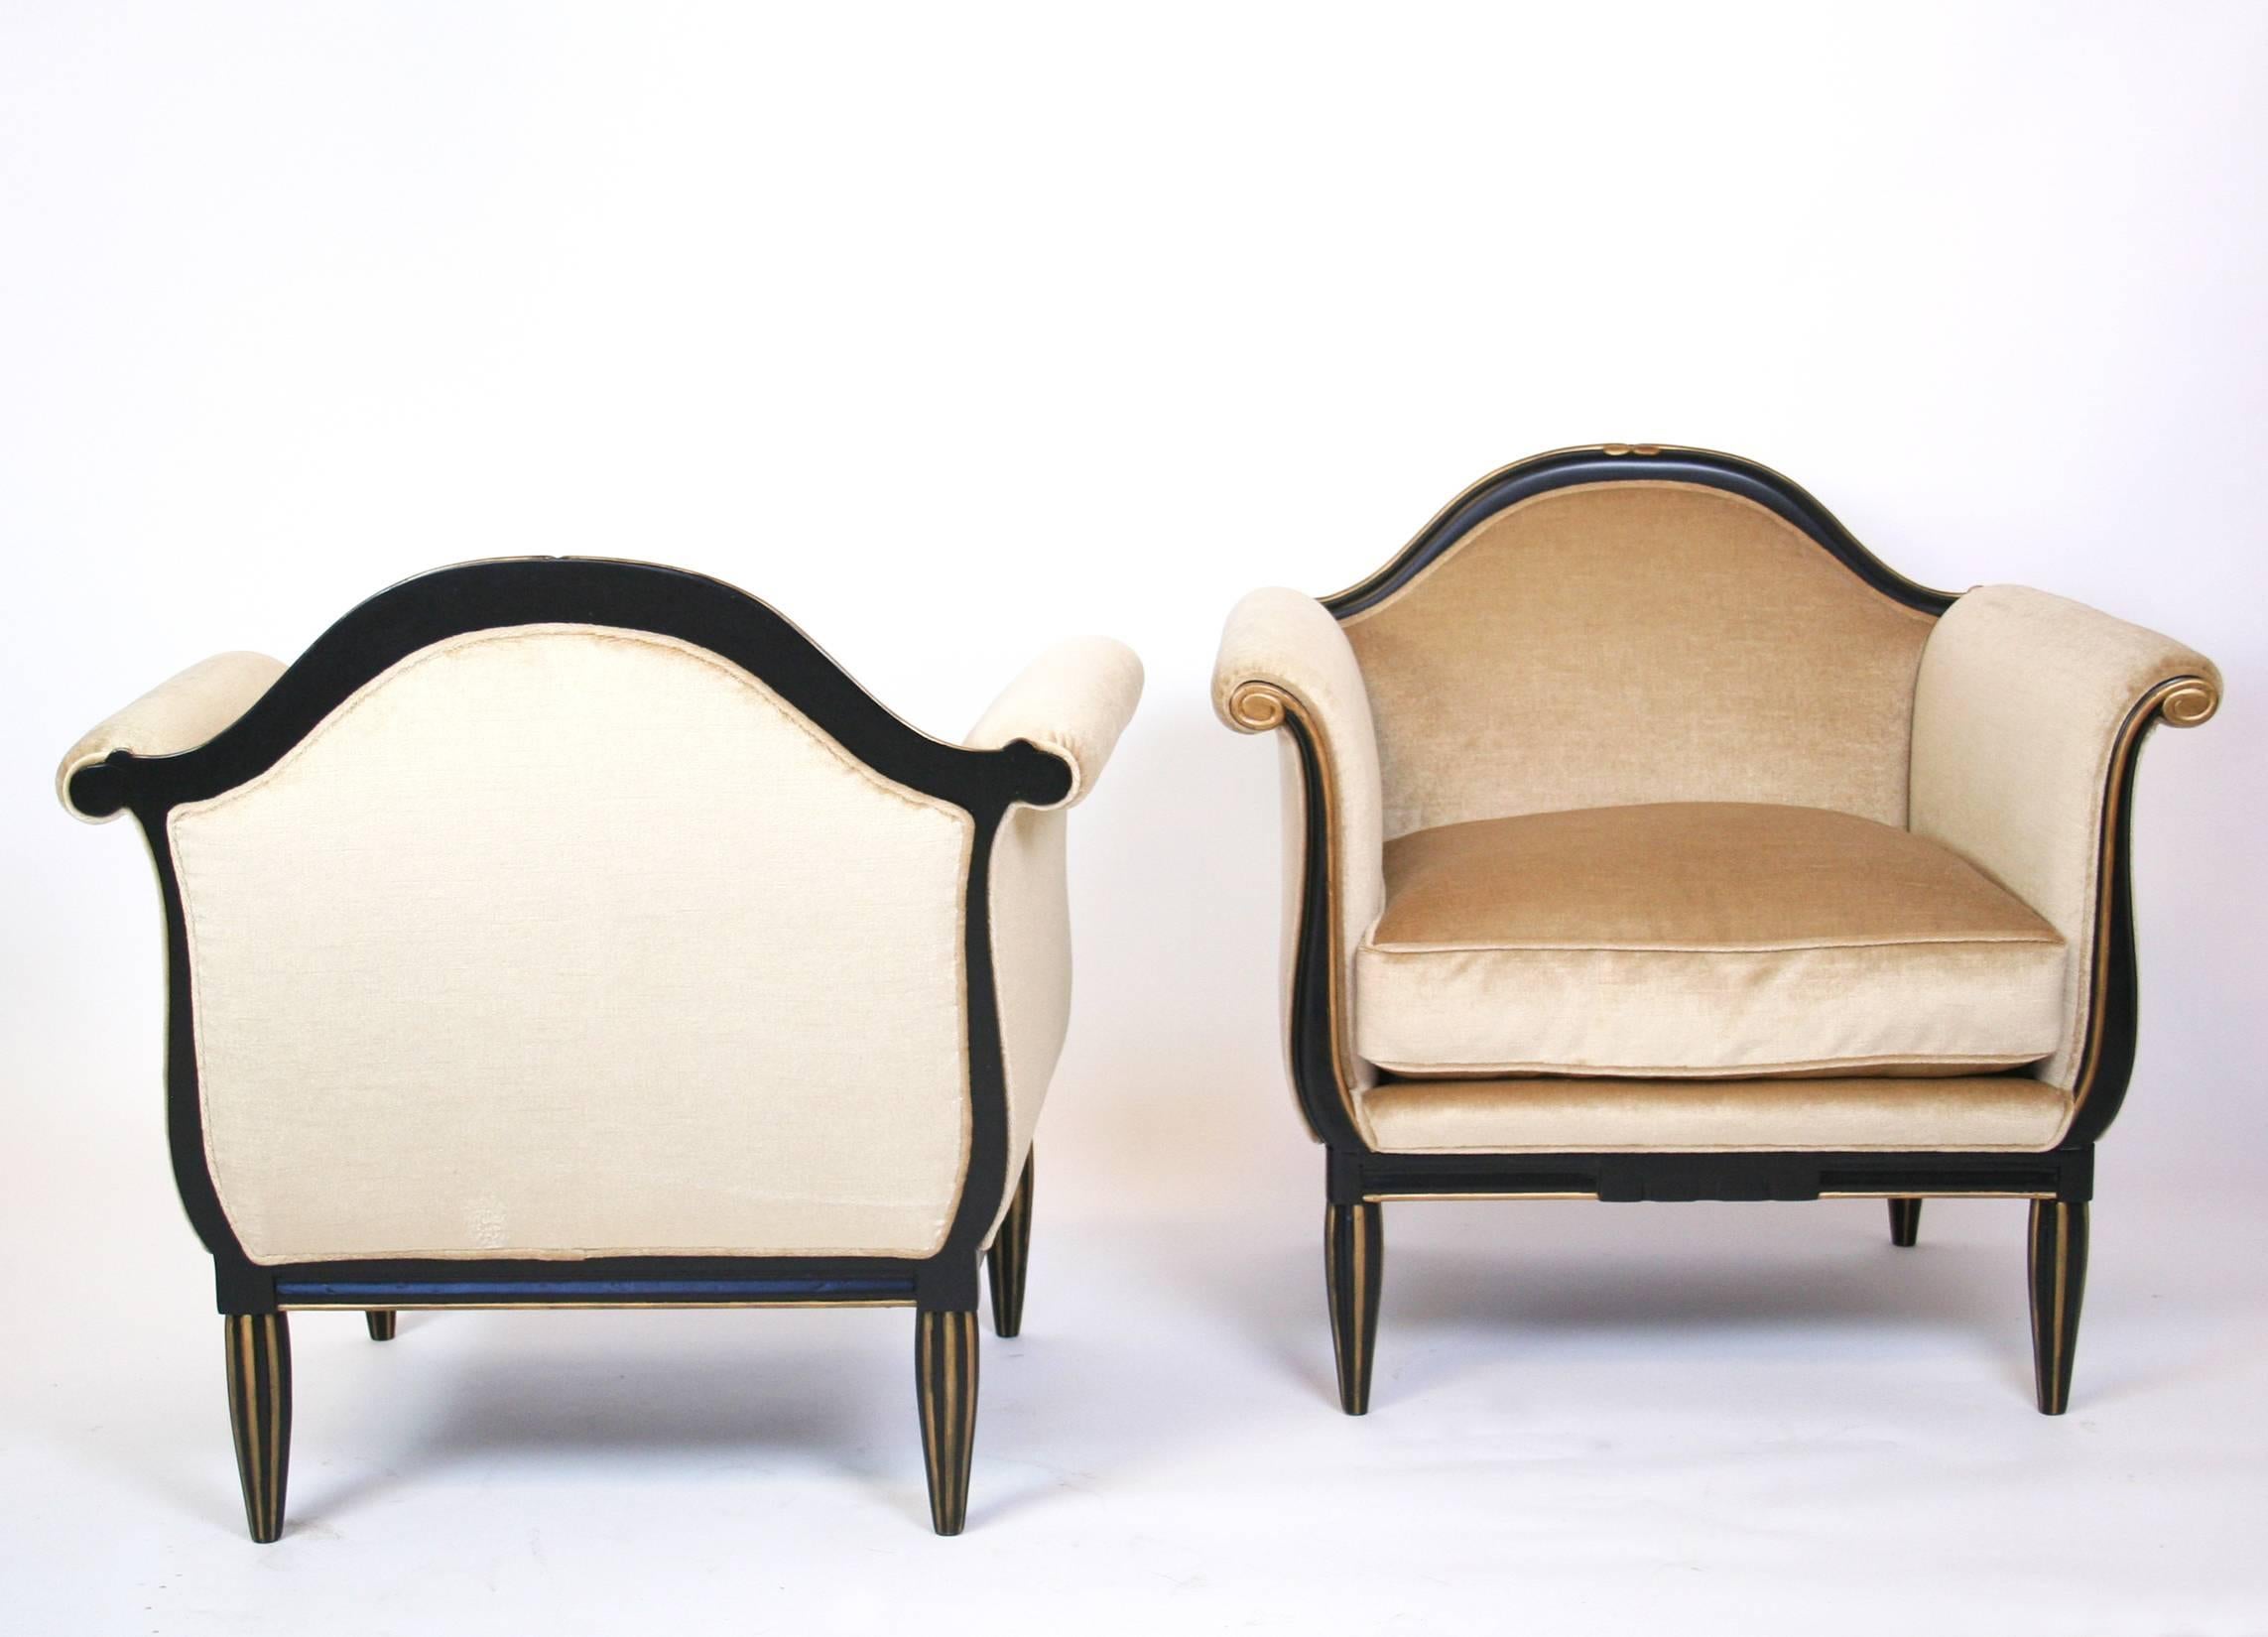 20th Century Pair of French Art Deco Lounge Chairs